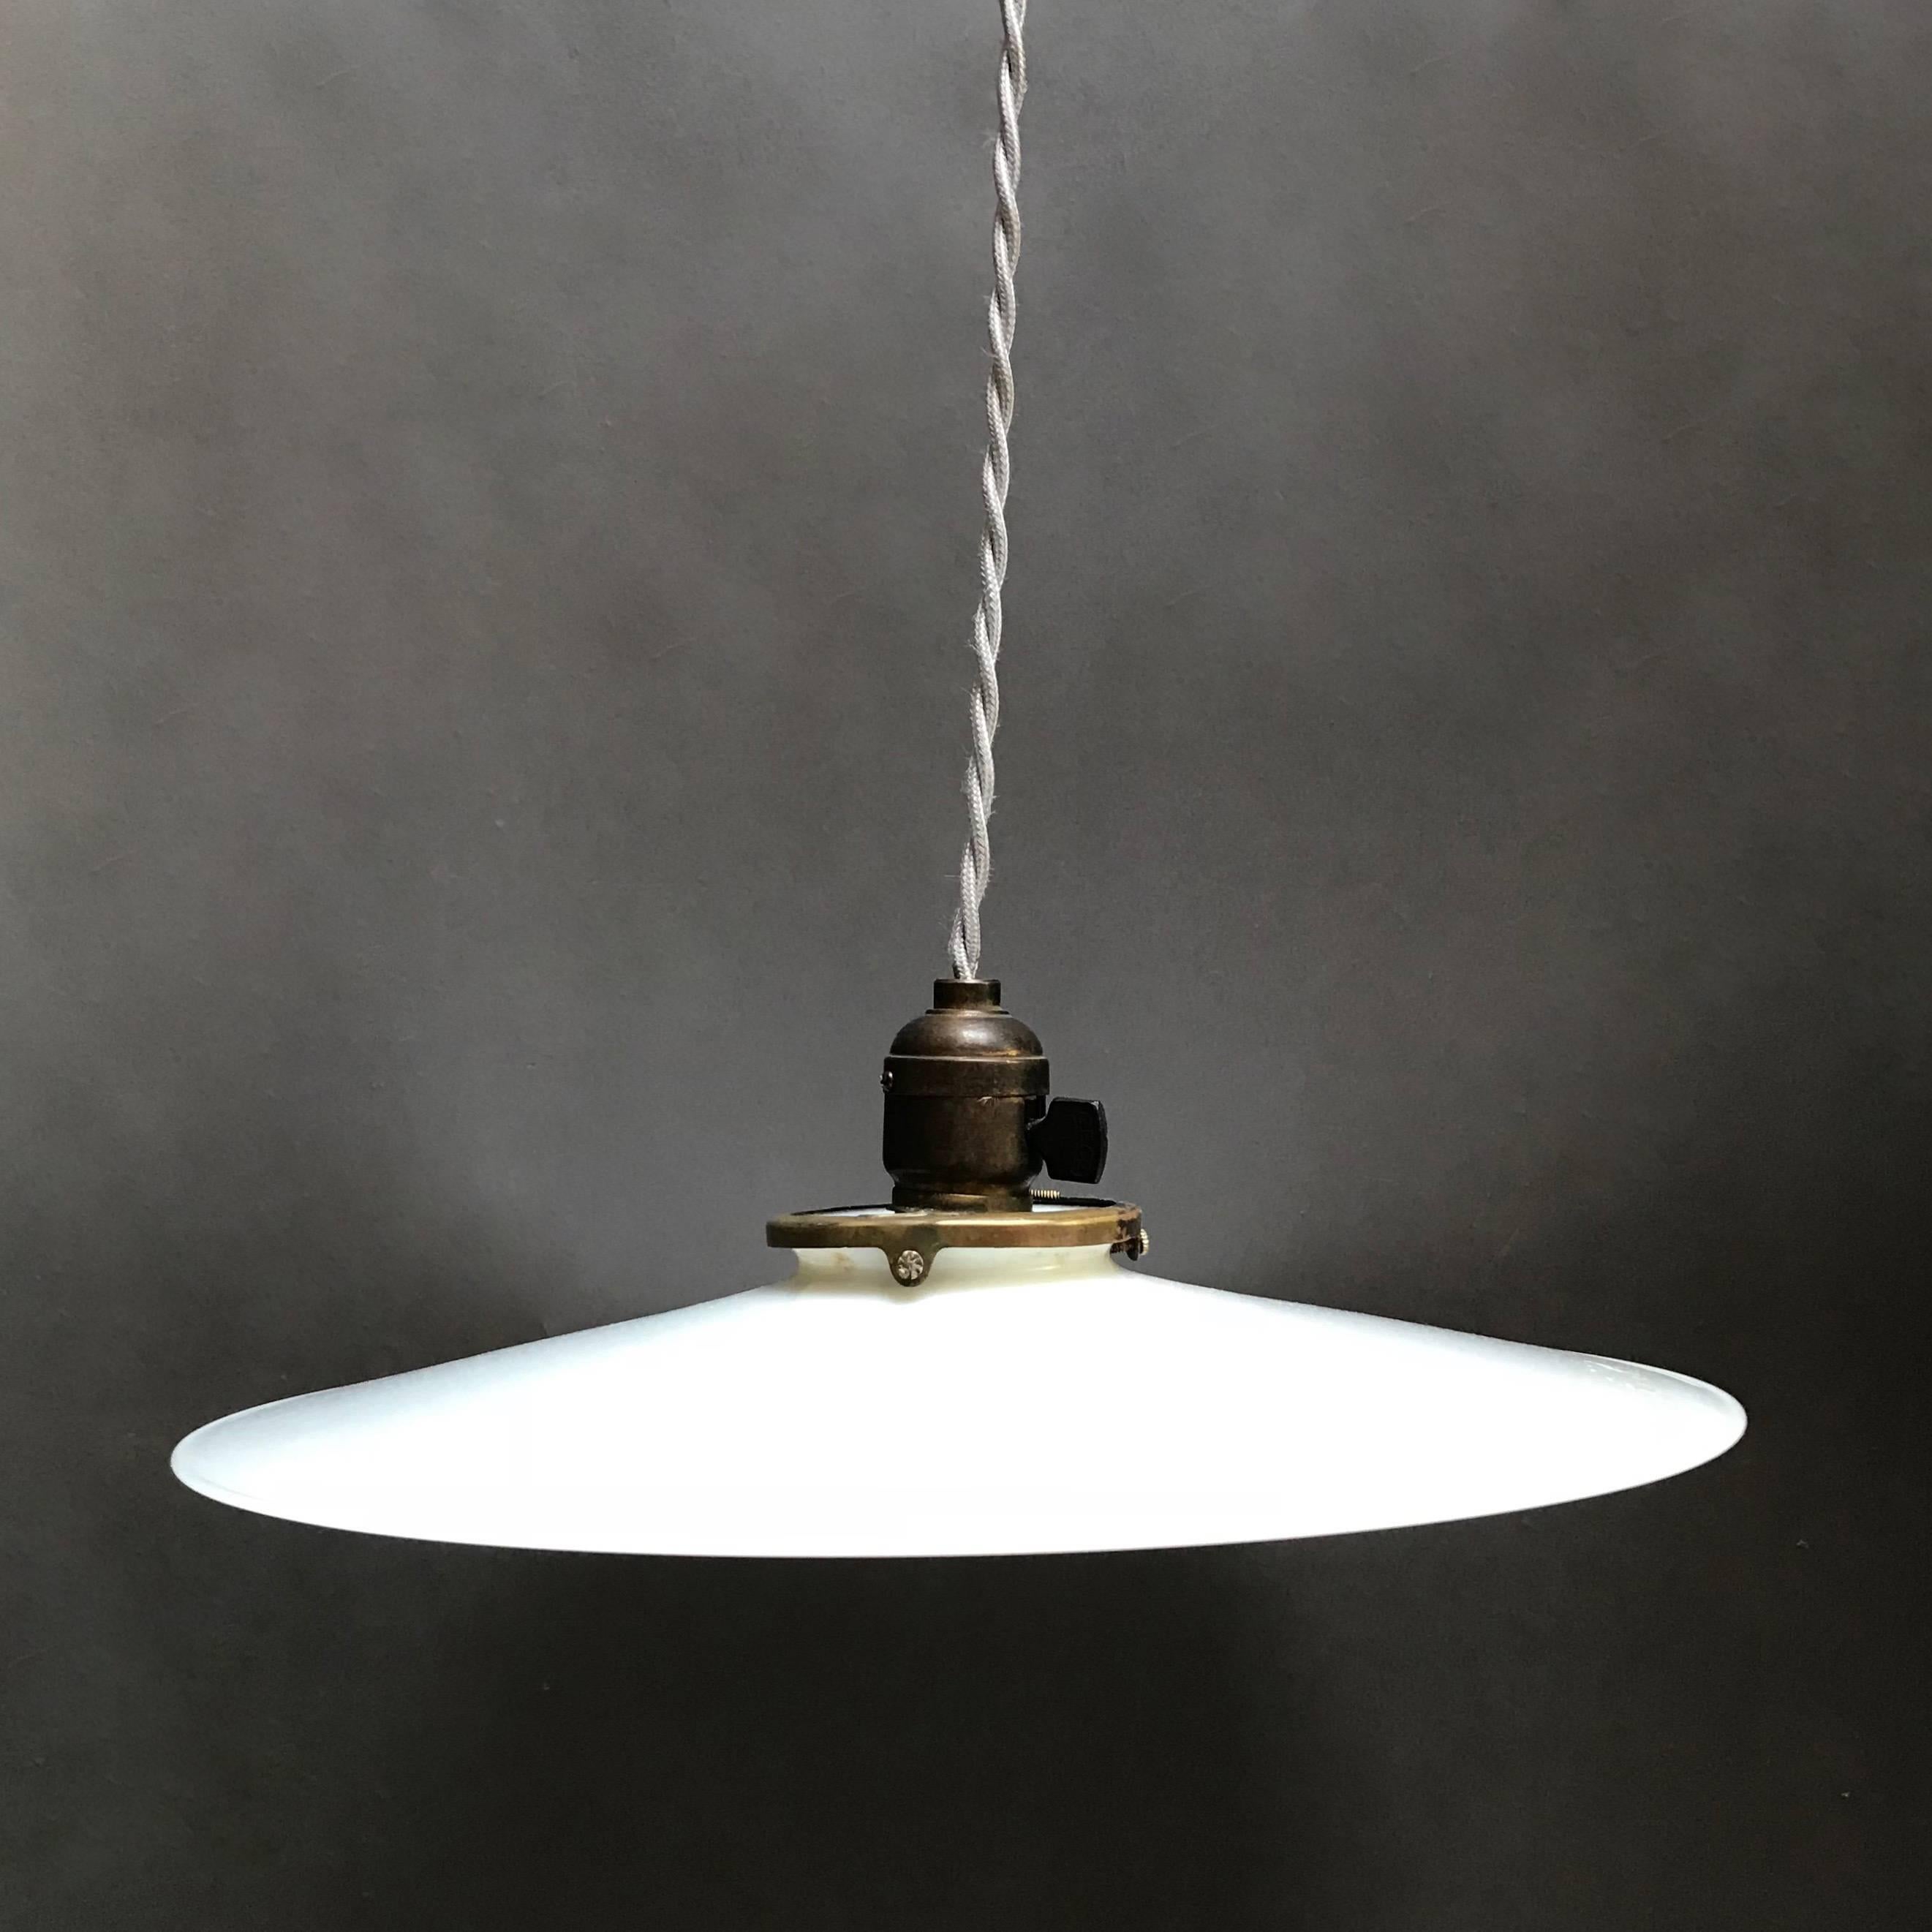 Pair of industrial pendant lights feature 13 inch, milk glass disc shades with open brass fitters are newly wired with 40 inches of braided gray cloth cord to accept up to 150 watt bulbs each.